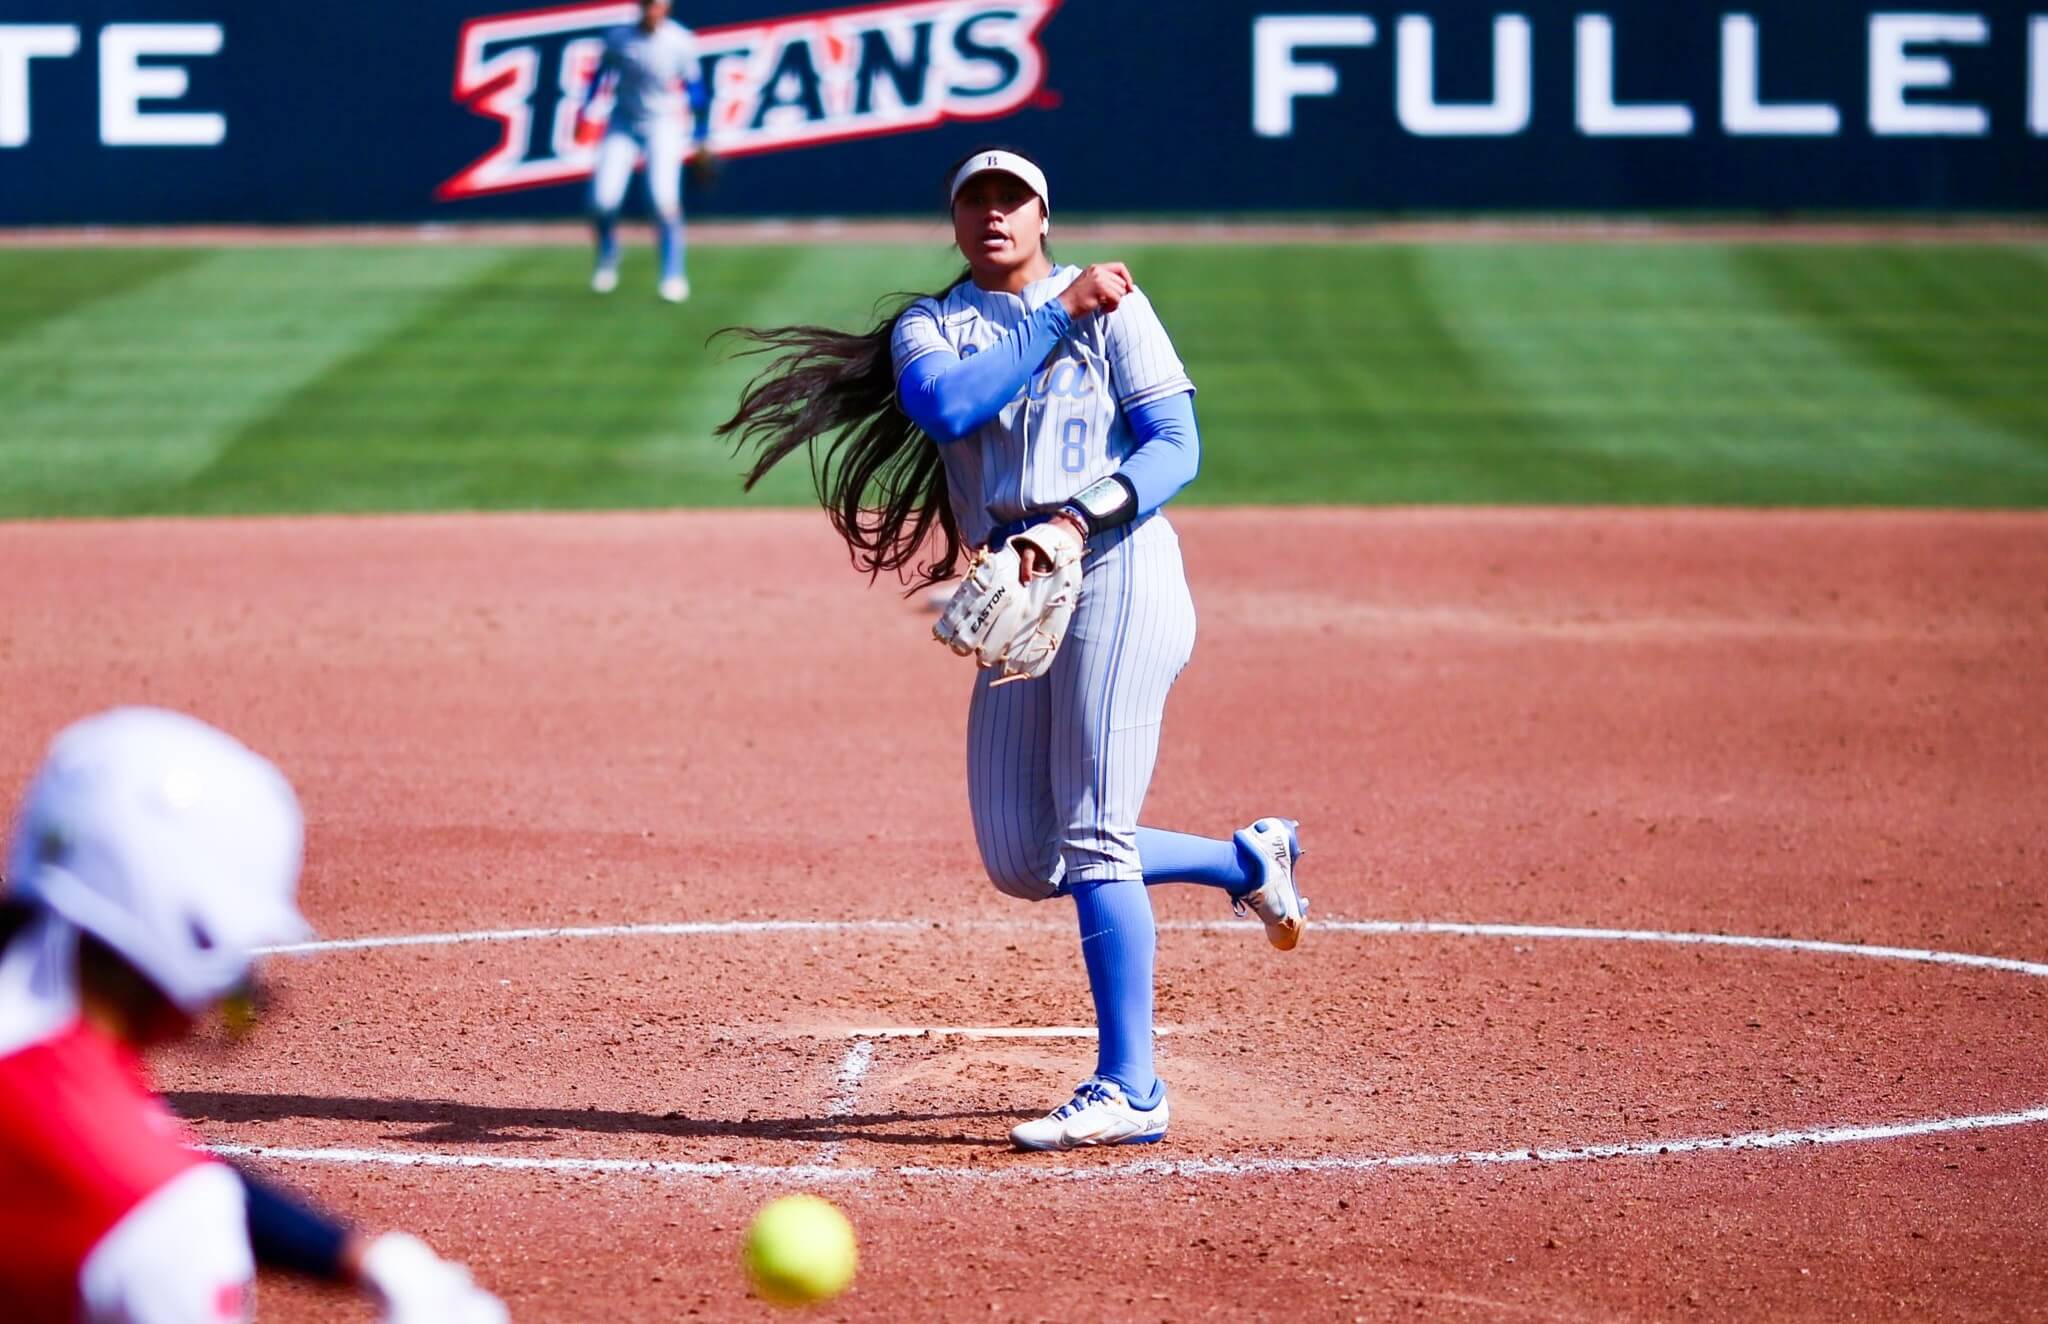 The Terrific Ten: Top Performances in College Softball from March 3rd.